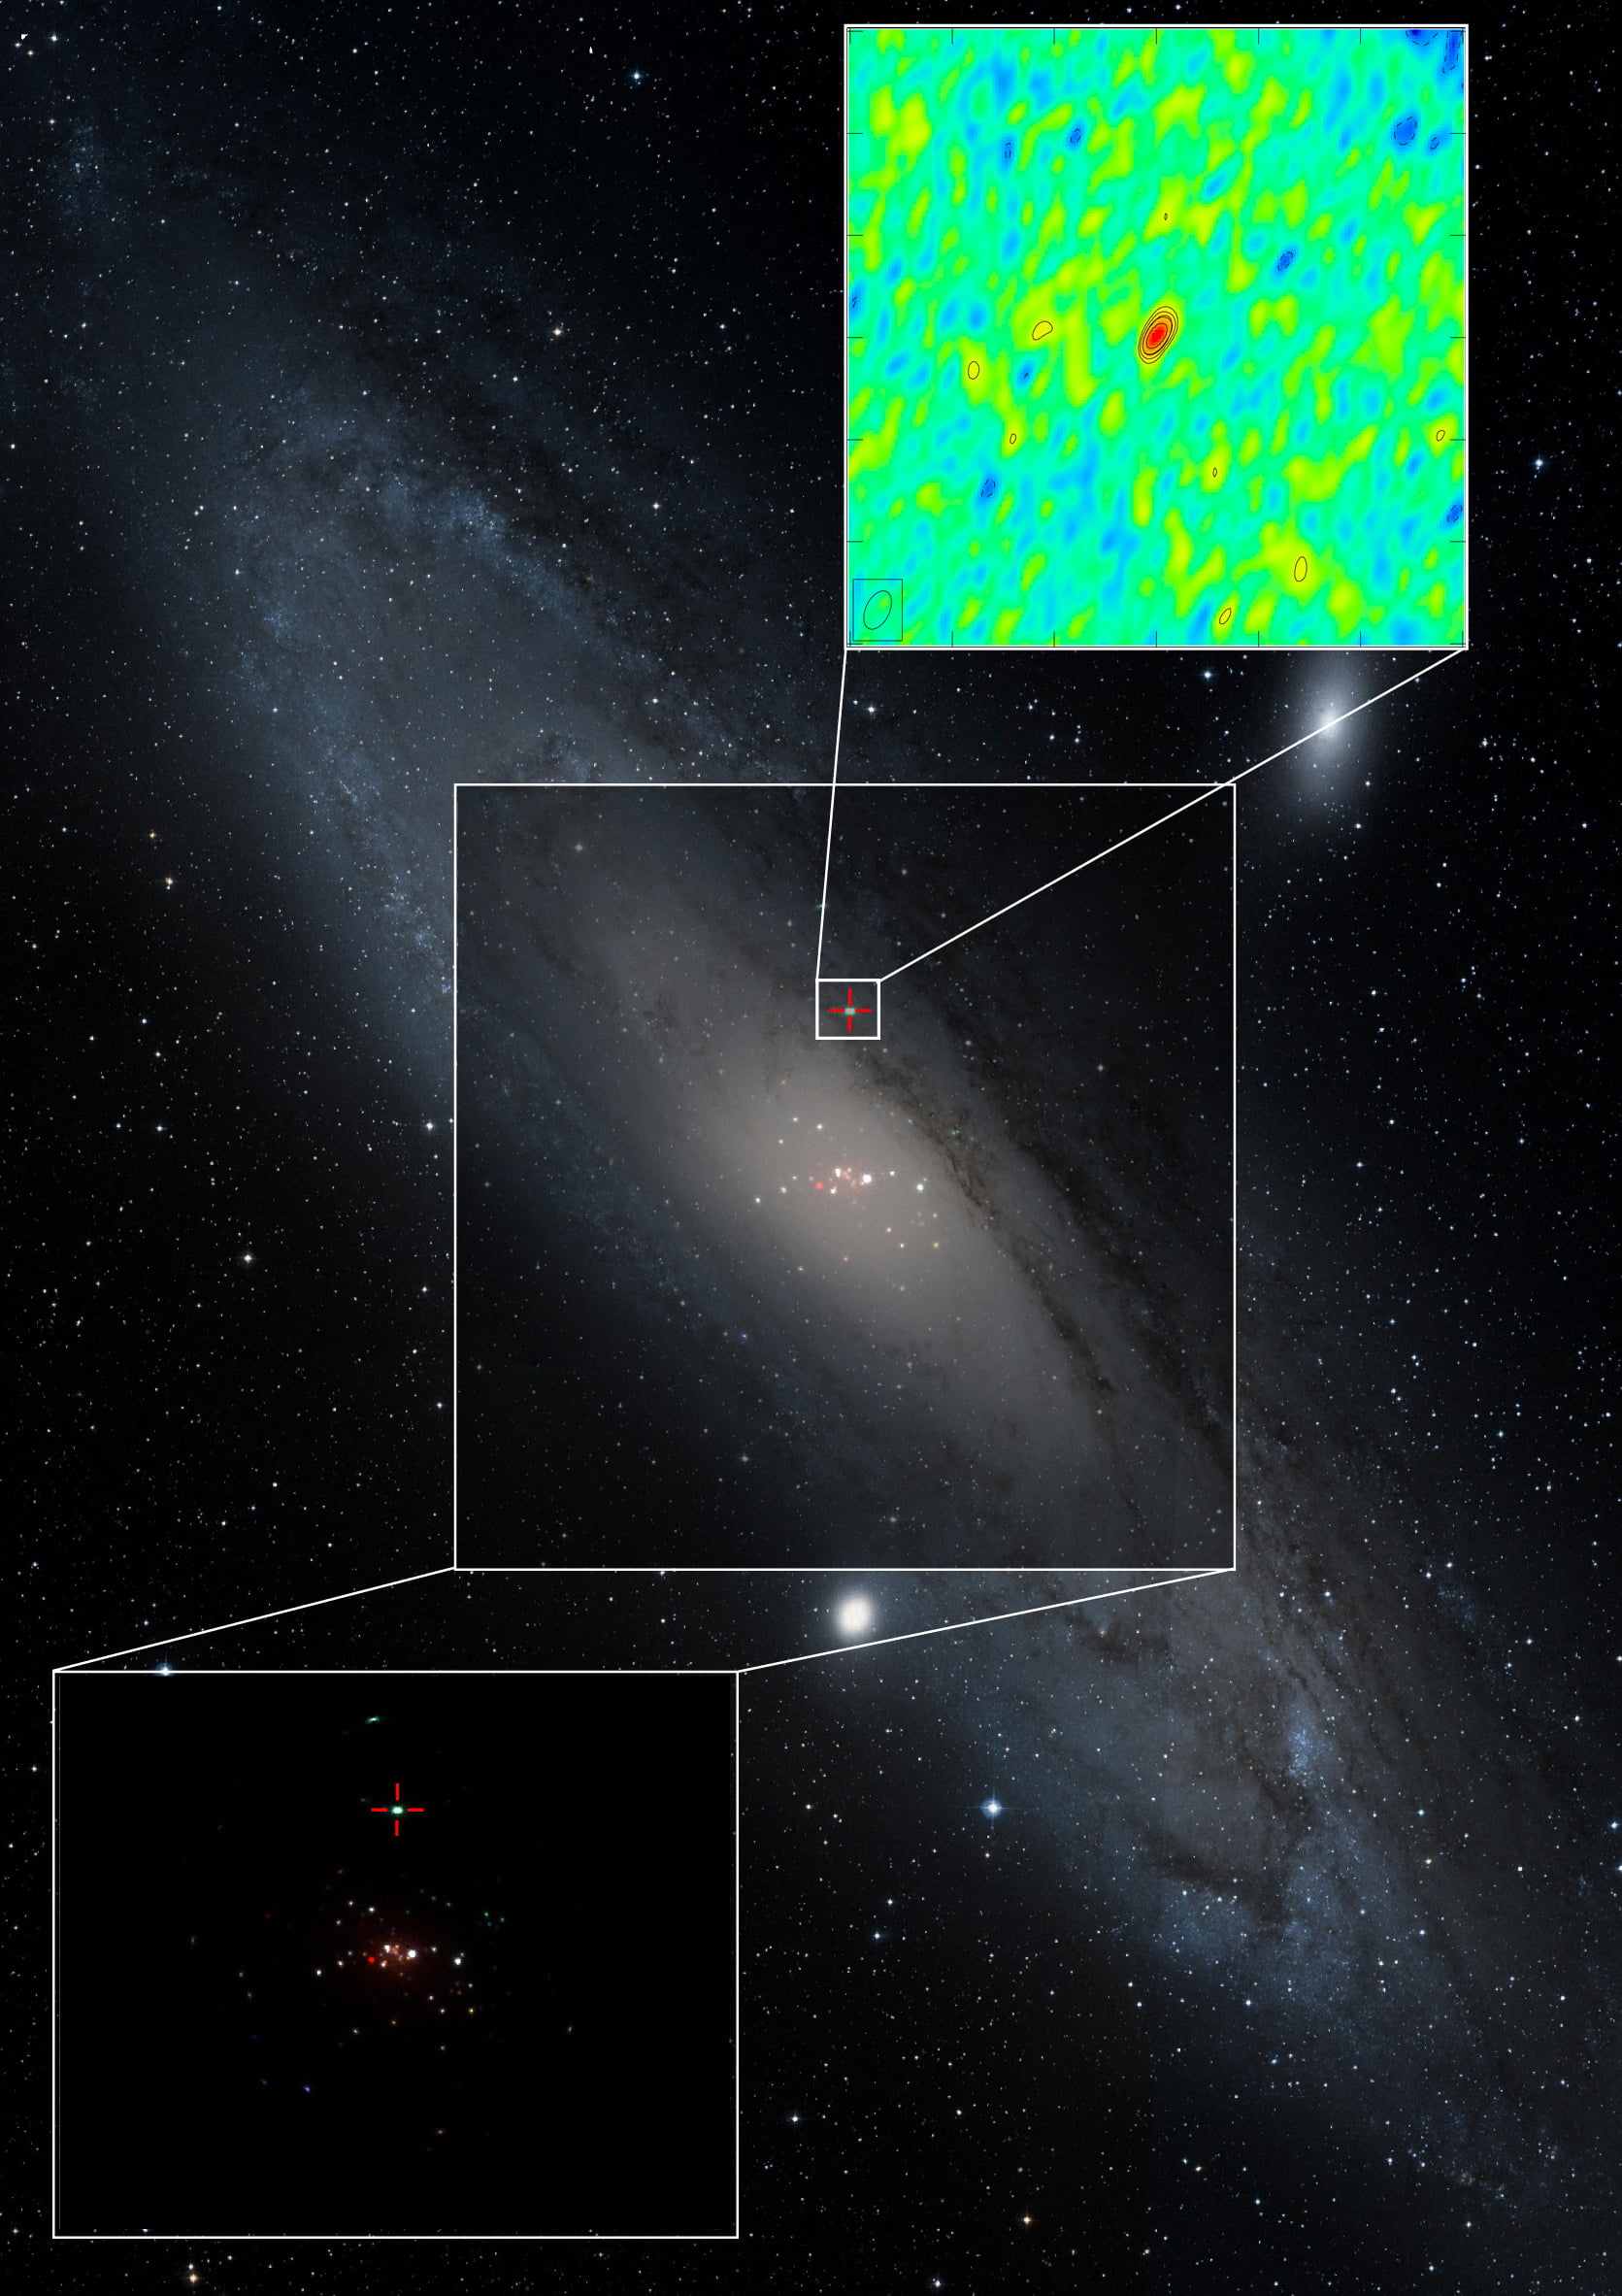 A composite image of our neighbouring galaxy, Andromeda, showing different views of the Ultraluminous X-ray (ULX) source. The background image is an optical (visible) light picture of Andromeda, with the X-ray image (bottom left) taken with the Earth-orbiting XMM-Newton X-ray telescope superimposed. Colours in the X-ray image correspond to different X-ray energies, with red being least energetic and blue being most energetic. The ULX is indicated by the cross-hairs. At the top right is the radio image of the black hole taken with the Very Long Baseline Array radio telescope, showing that the radio emission was coming from an extremely small region of space, and leading the team to infer that the extraordinary amount of X-ray emission they observed was produced by a relatively modest-sized black hole. Image Credit: X-rays: ESA/M. Middleton et al., Radio: NRAO/M. Middleton et al., Optical: Aladin/STScI DSS. 